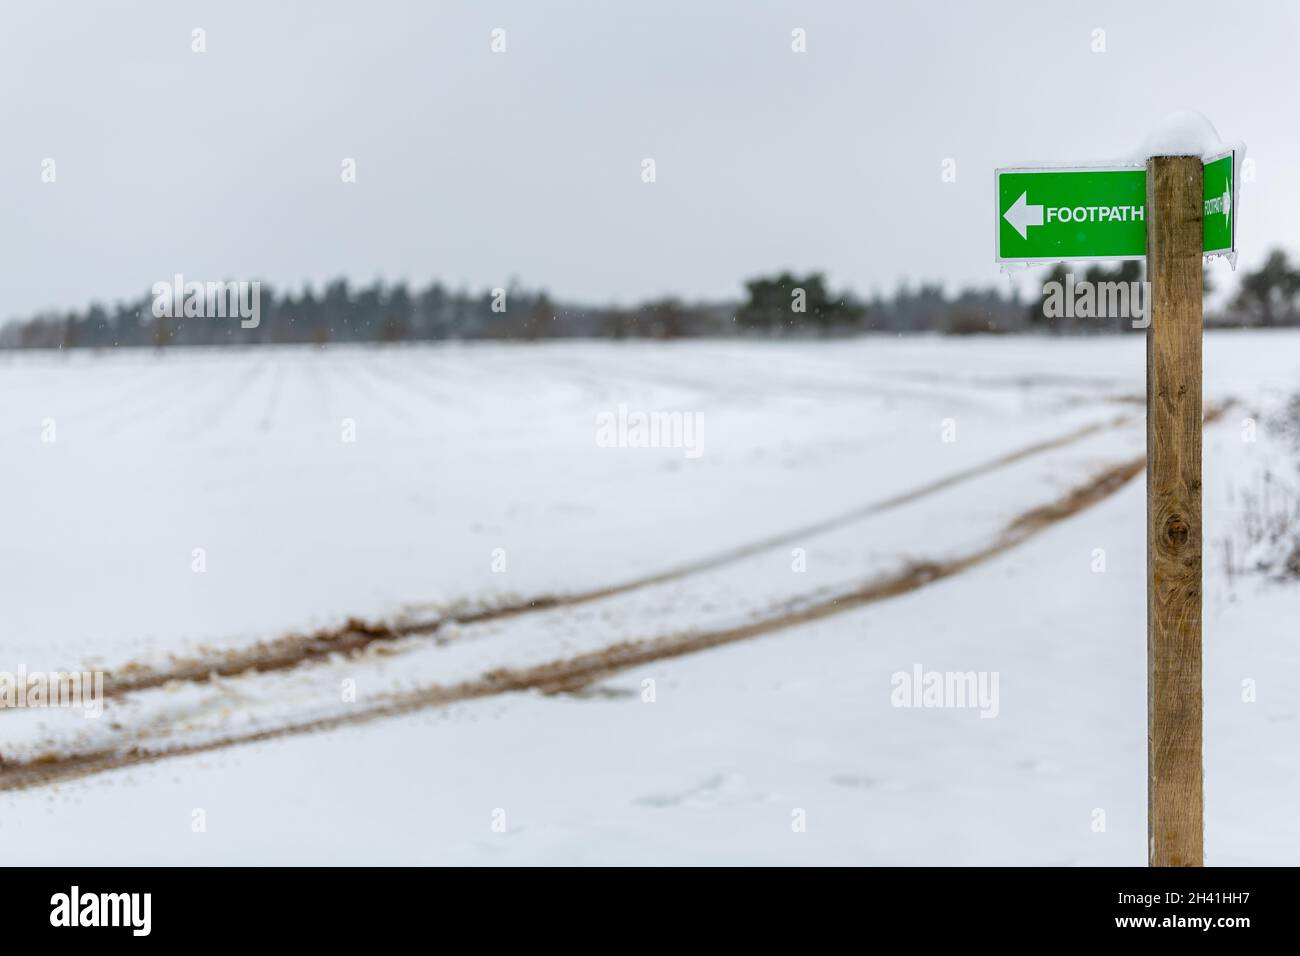 Public footpath sign pointing to the left with snow and icicles on it in rural British Countryside Stock Photo